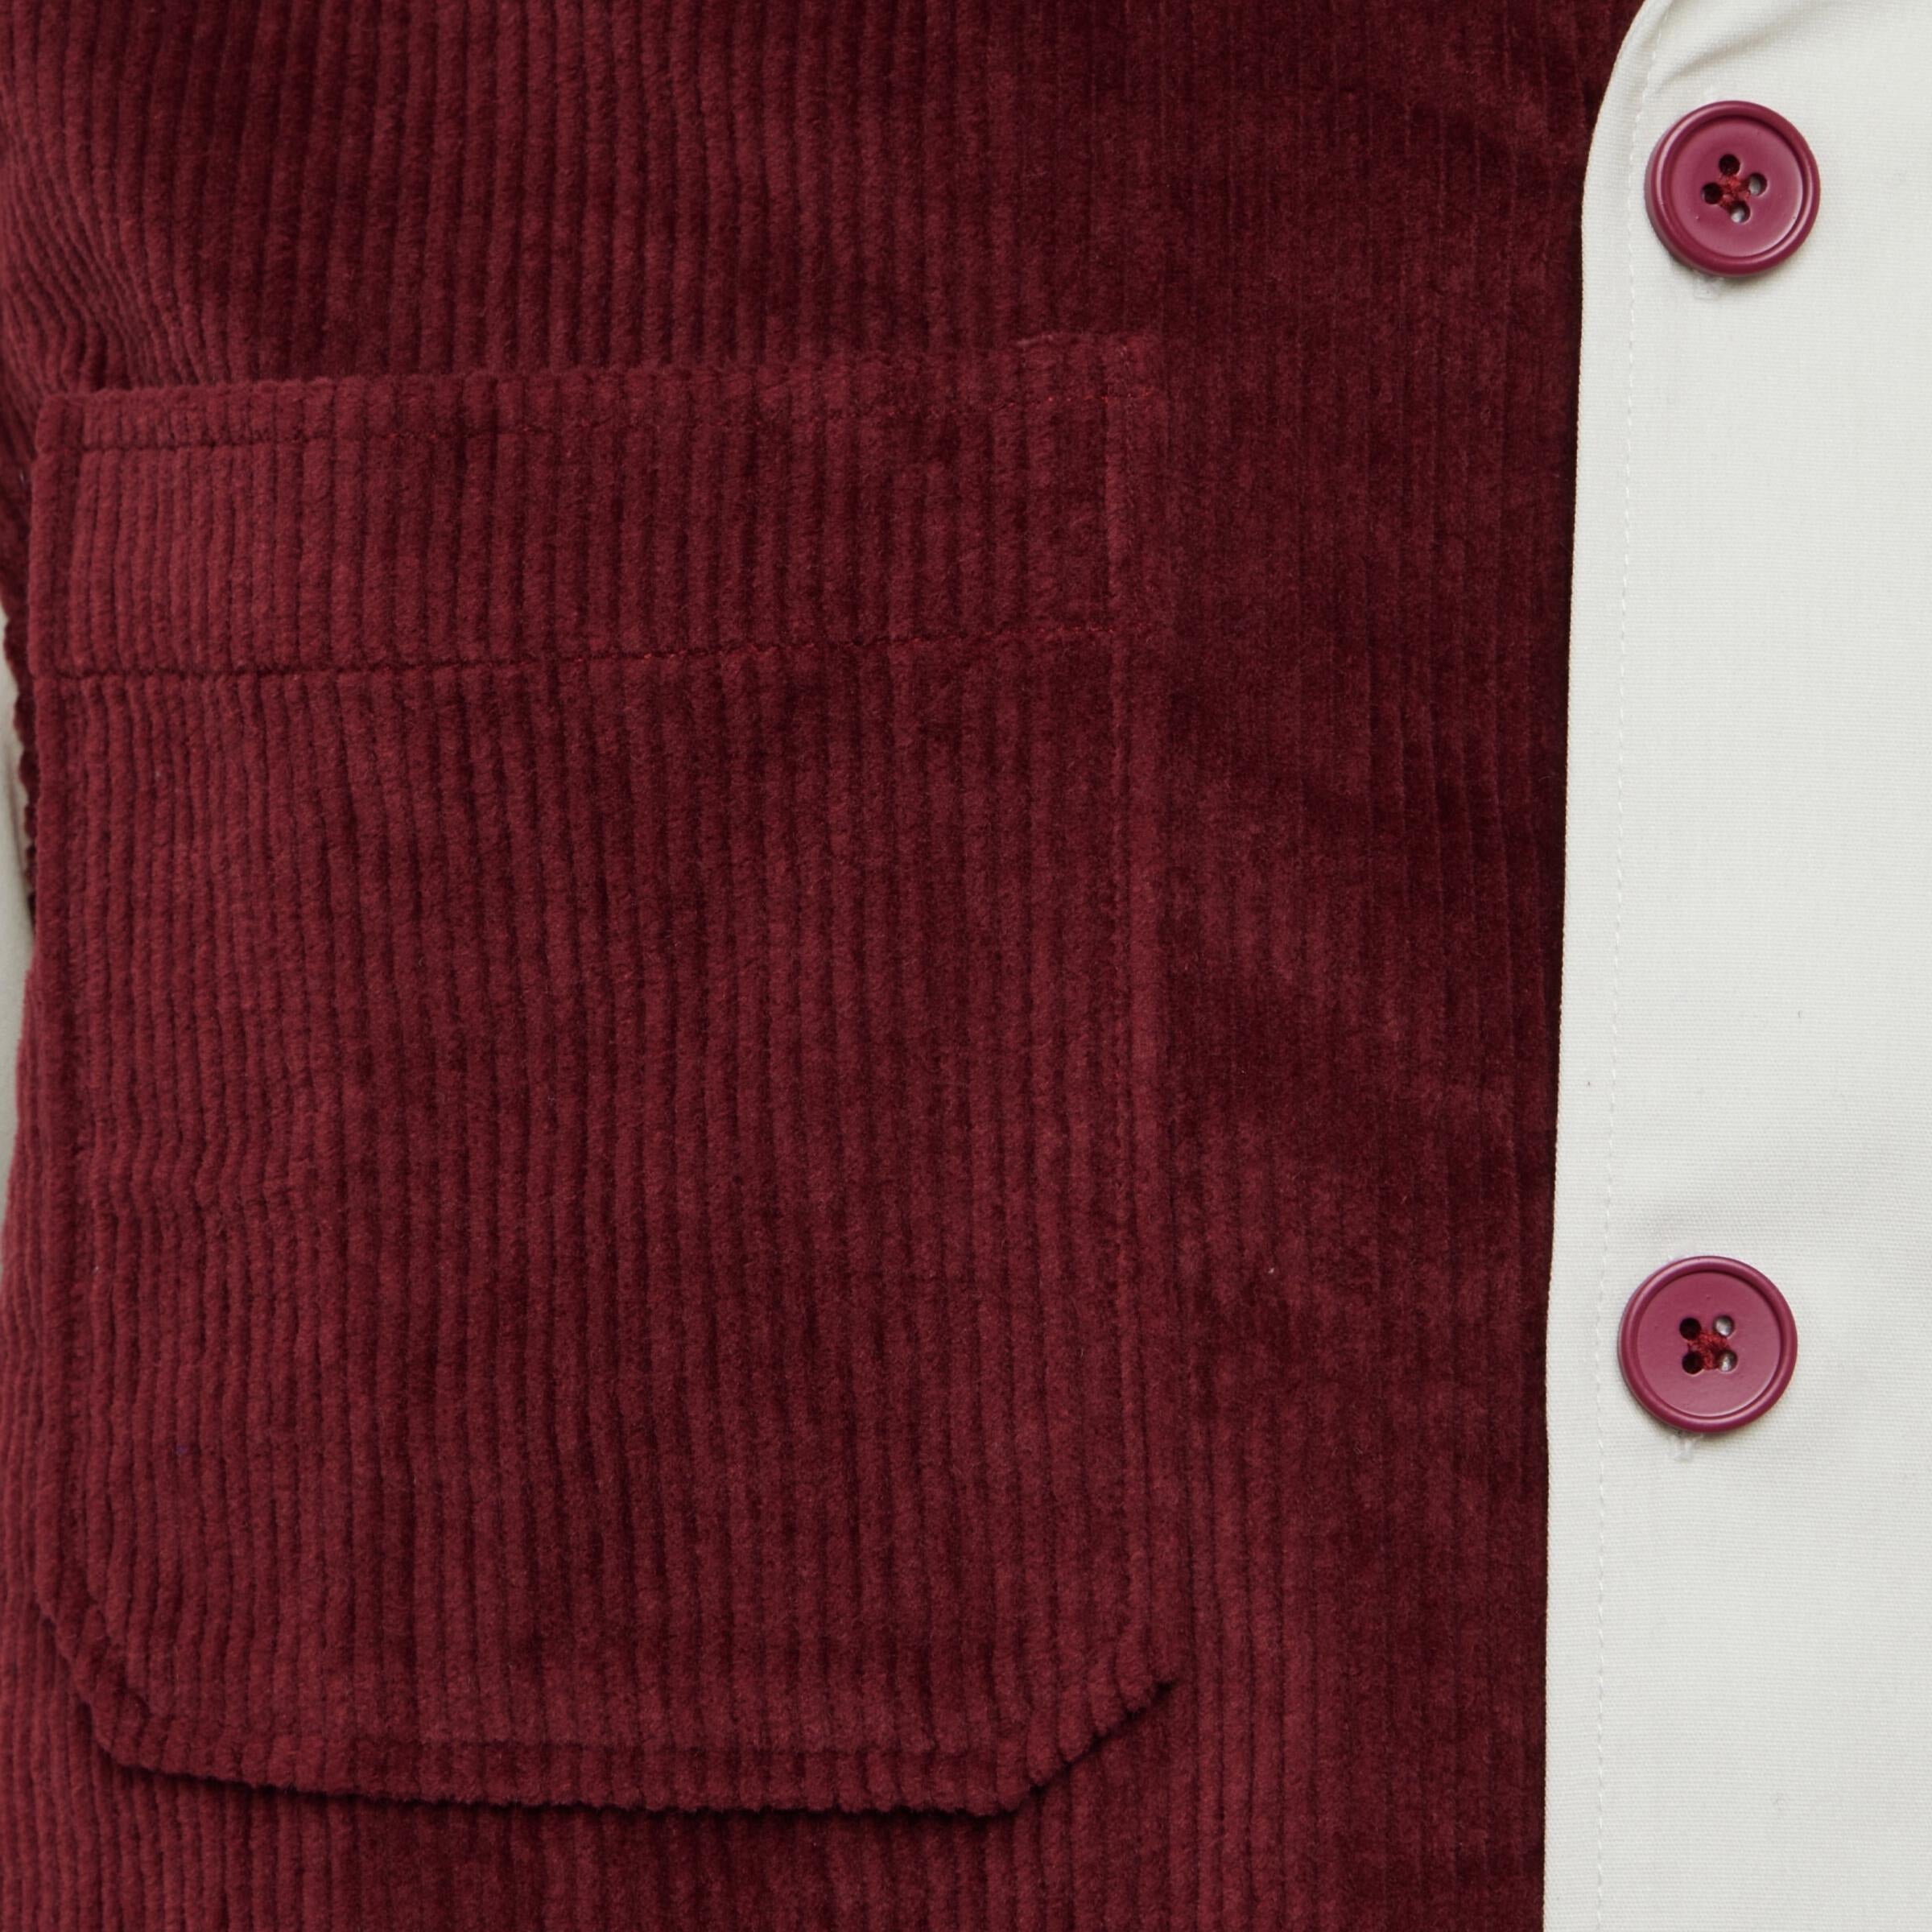 Homme + Femme Button Down Shirt - Maroon Paneled Bowling